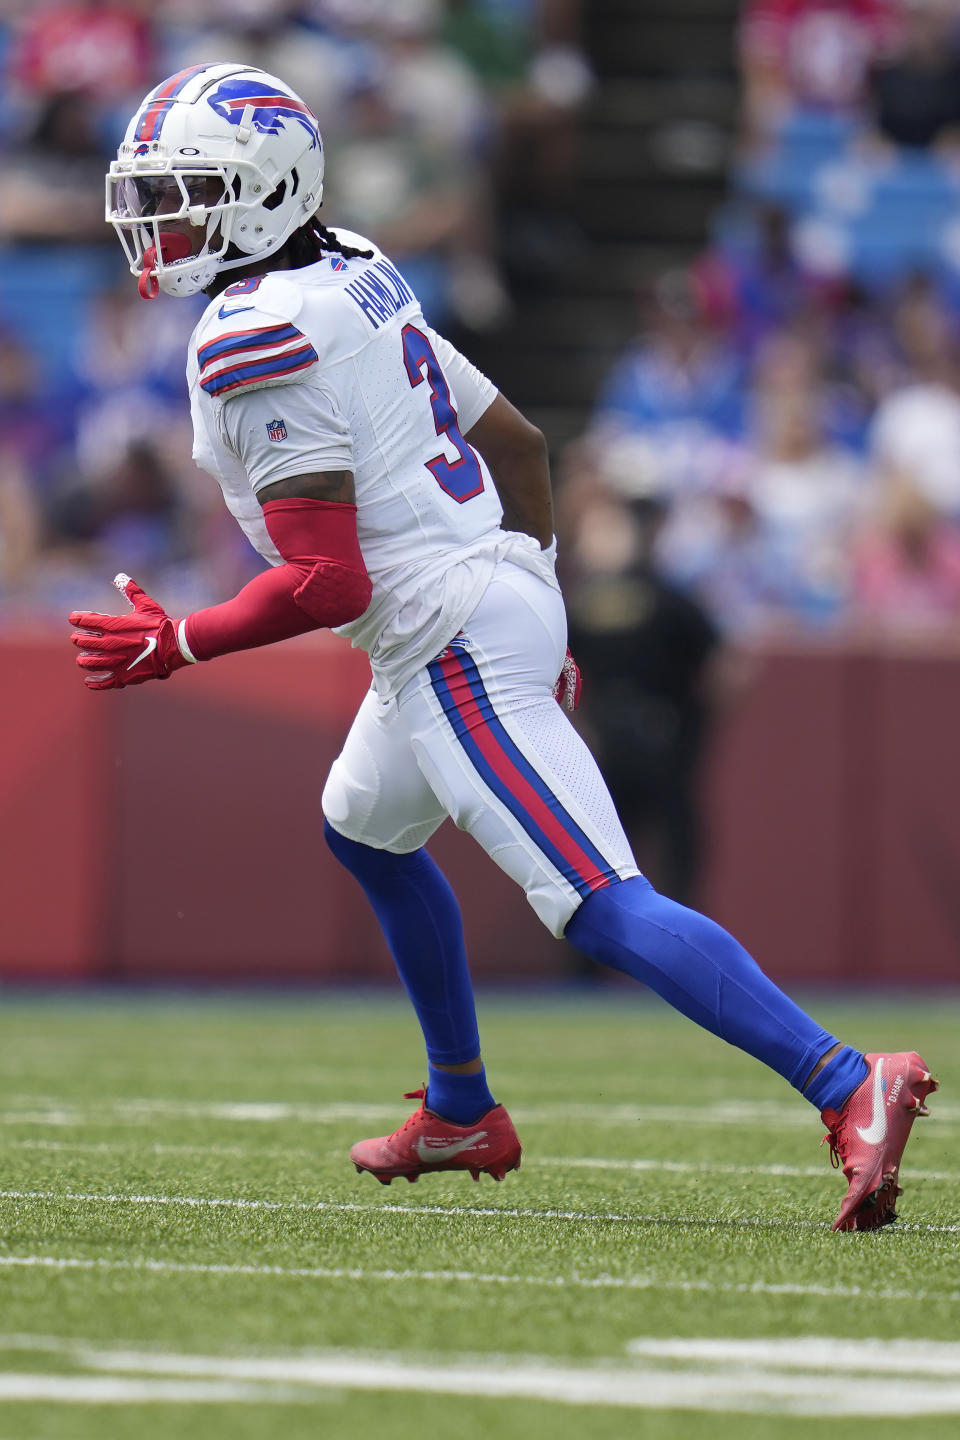 Buffalo Bills safety Damar Hamlin runs toward the play during the first half of an NFL preseason football game against the Indianapolis Colts in Orchard Park, N.Y., Saturday, Aug. 12, 2023. (AP Photo/Charles Krupa)